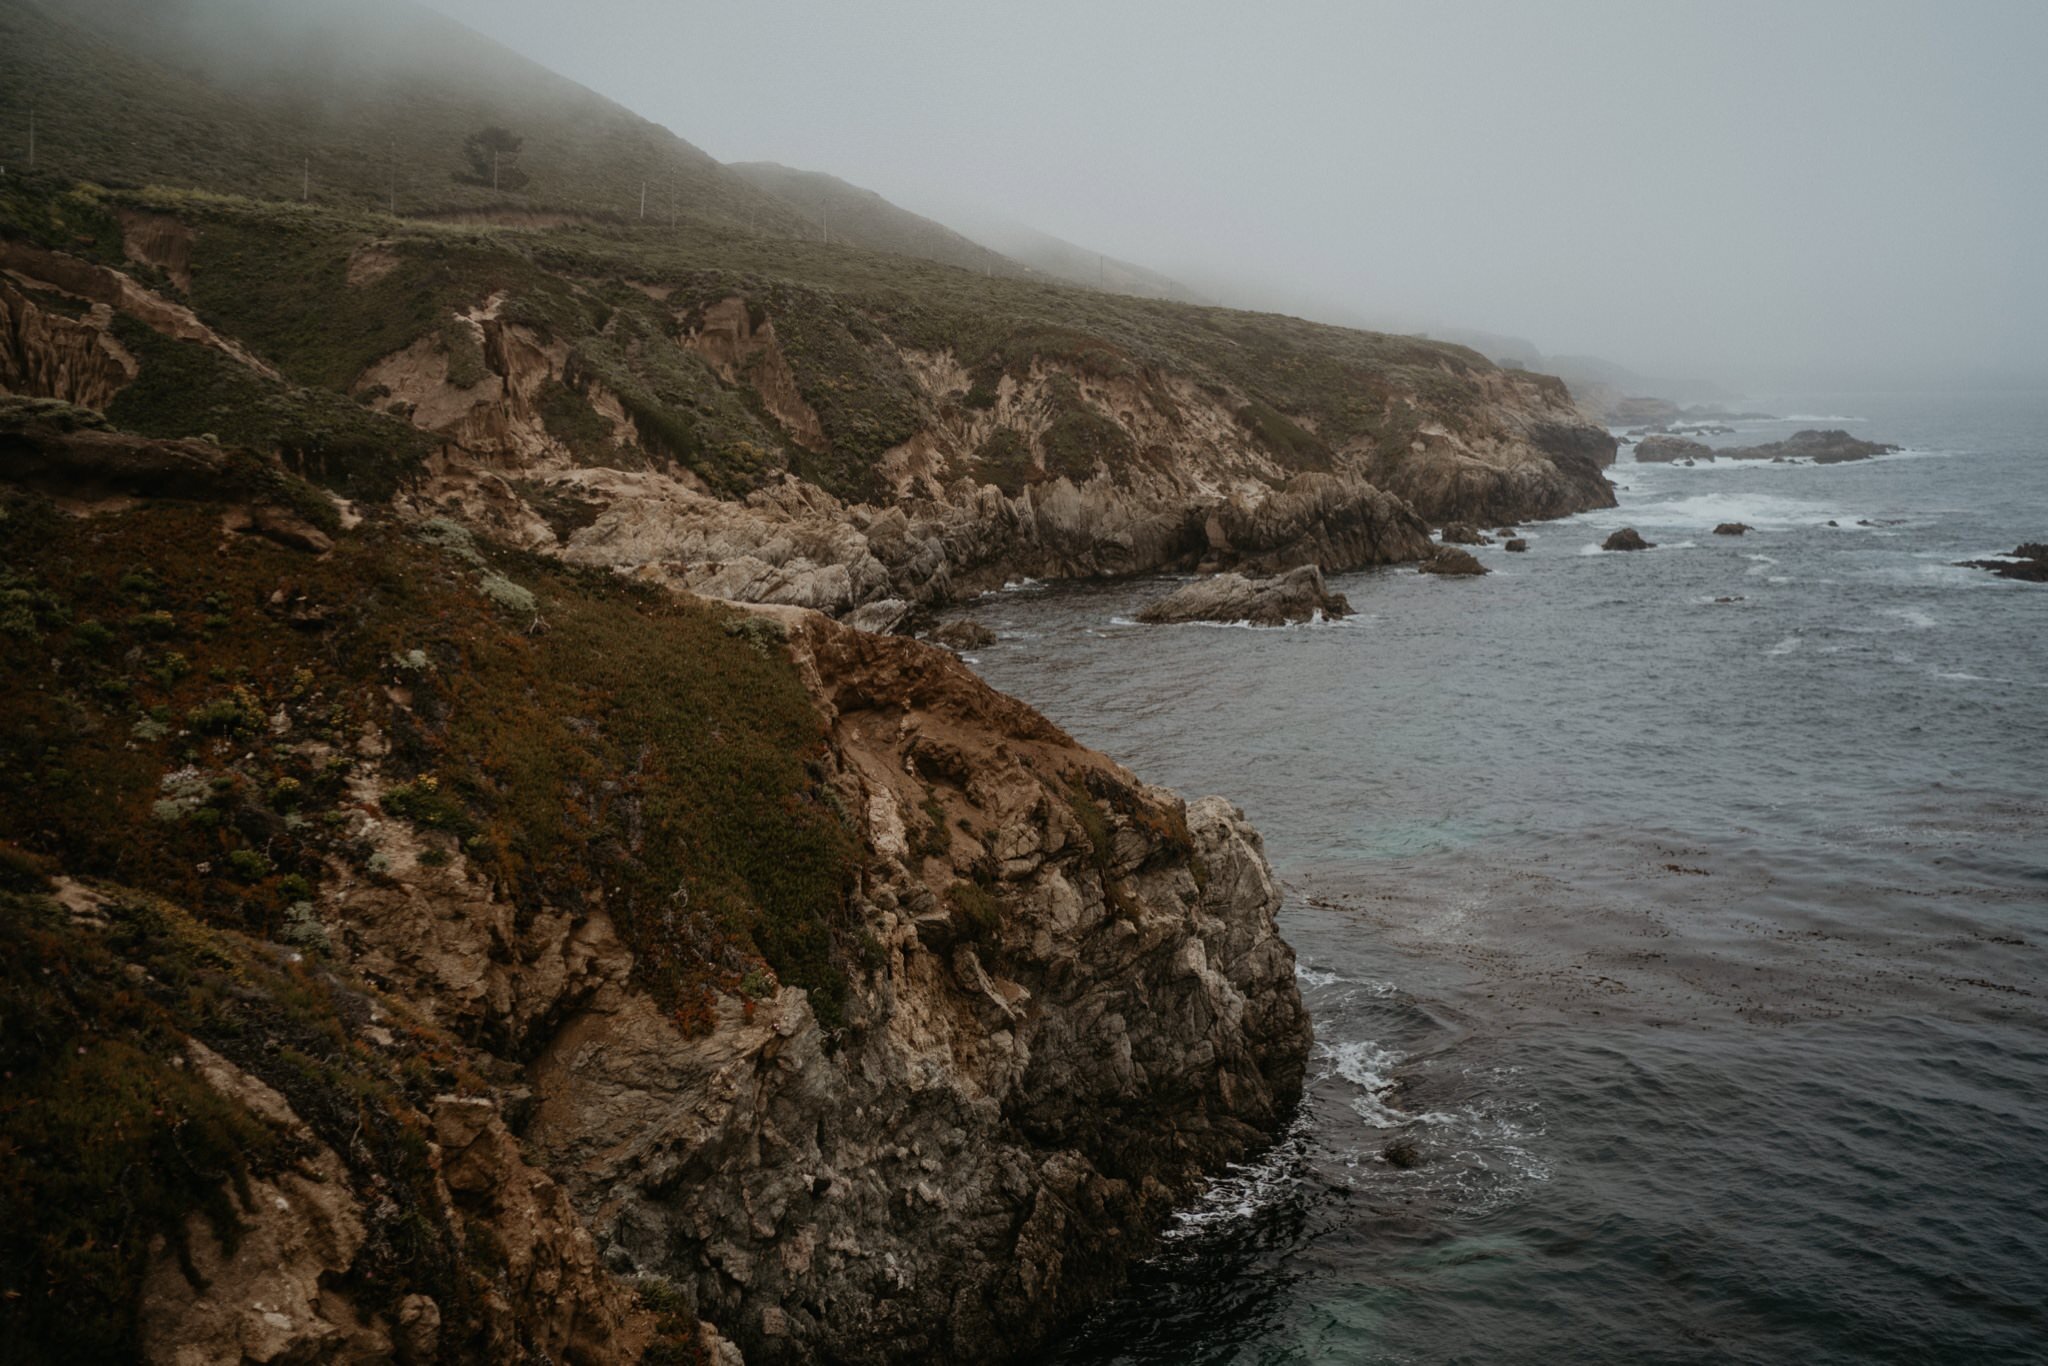 Moody and Foggy Big Sur Engagement Session